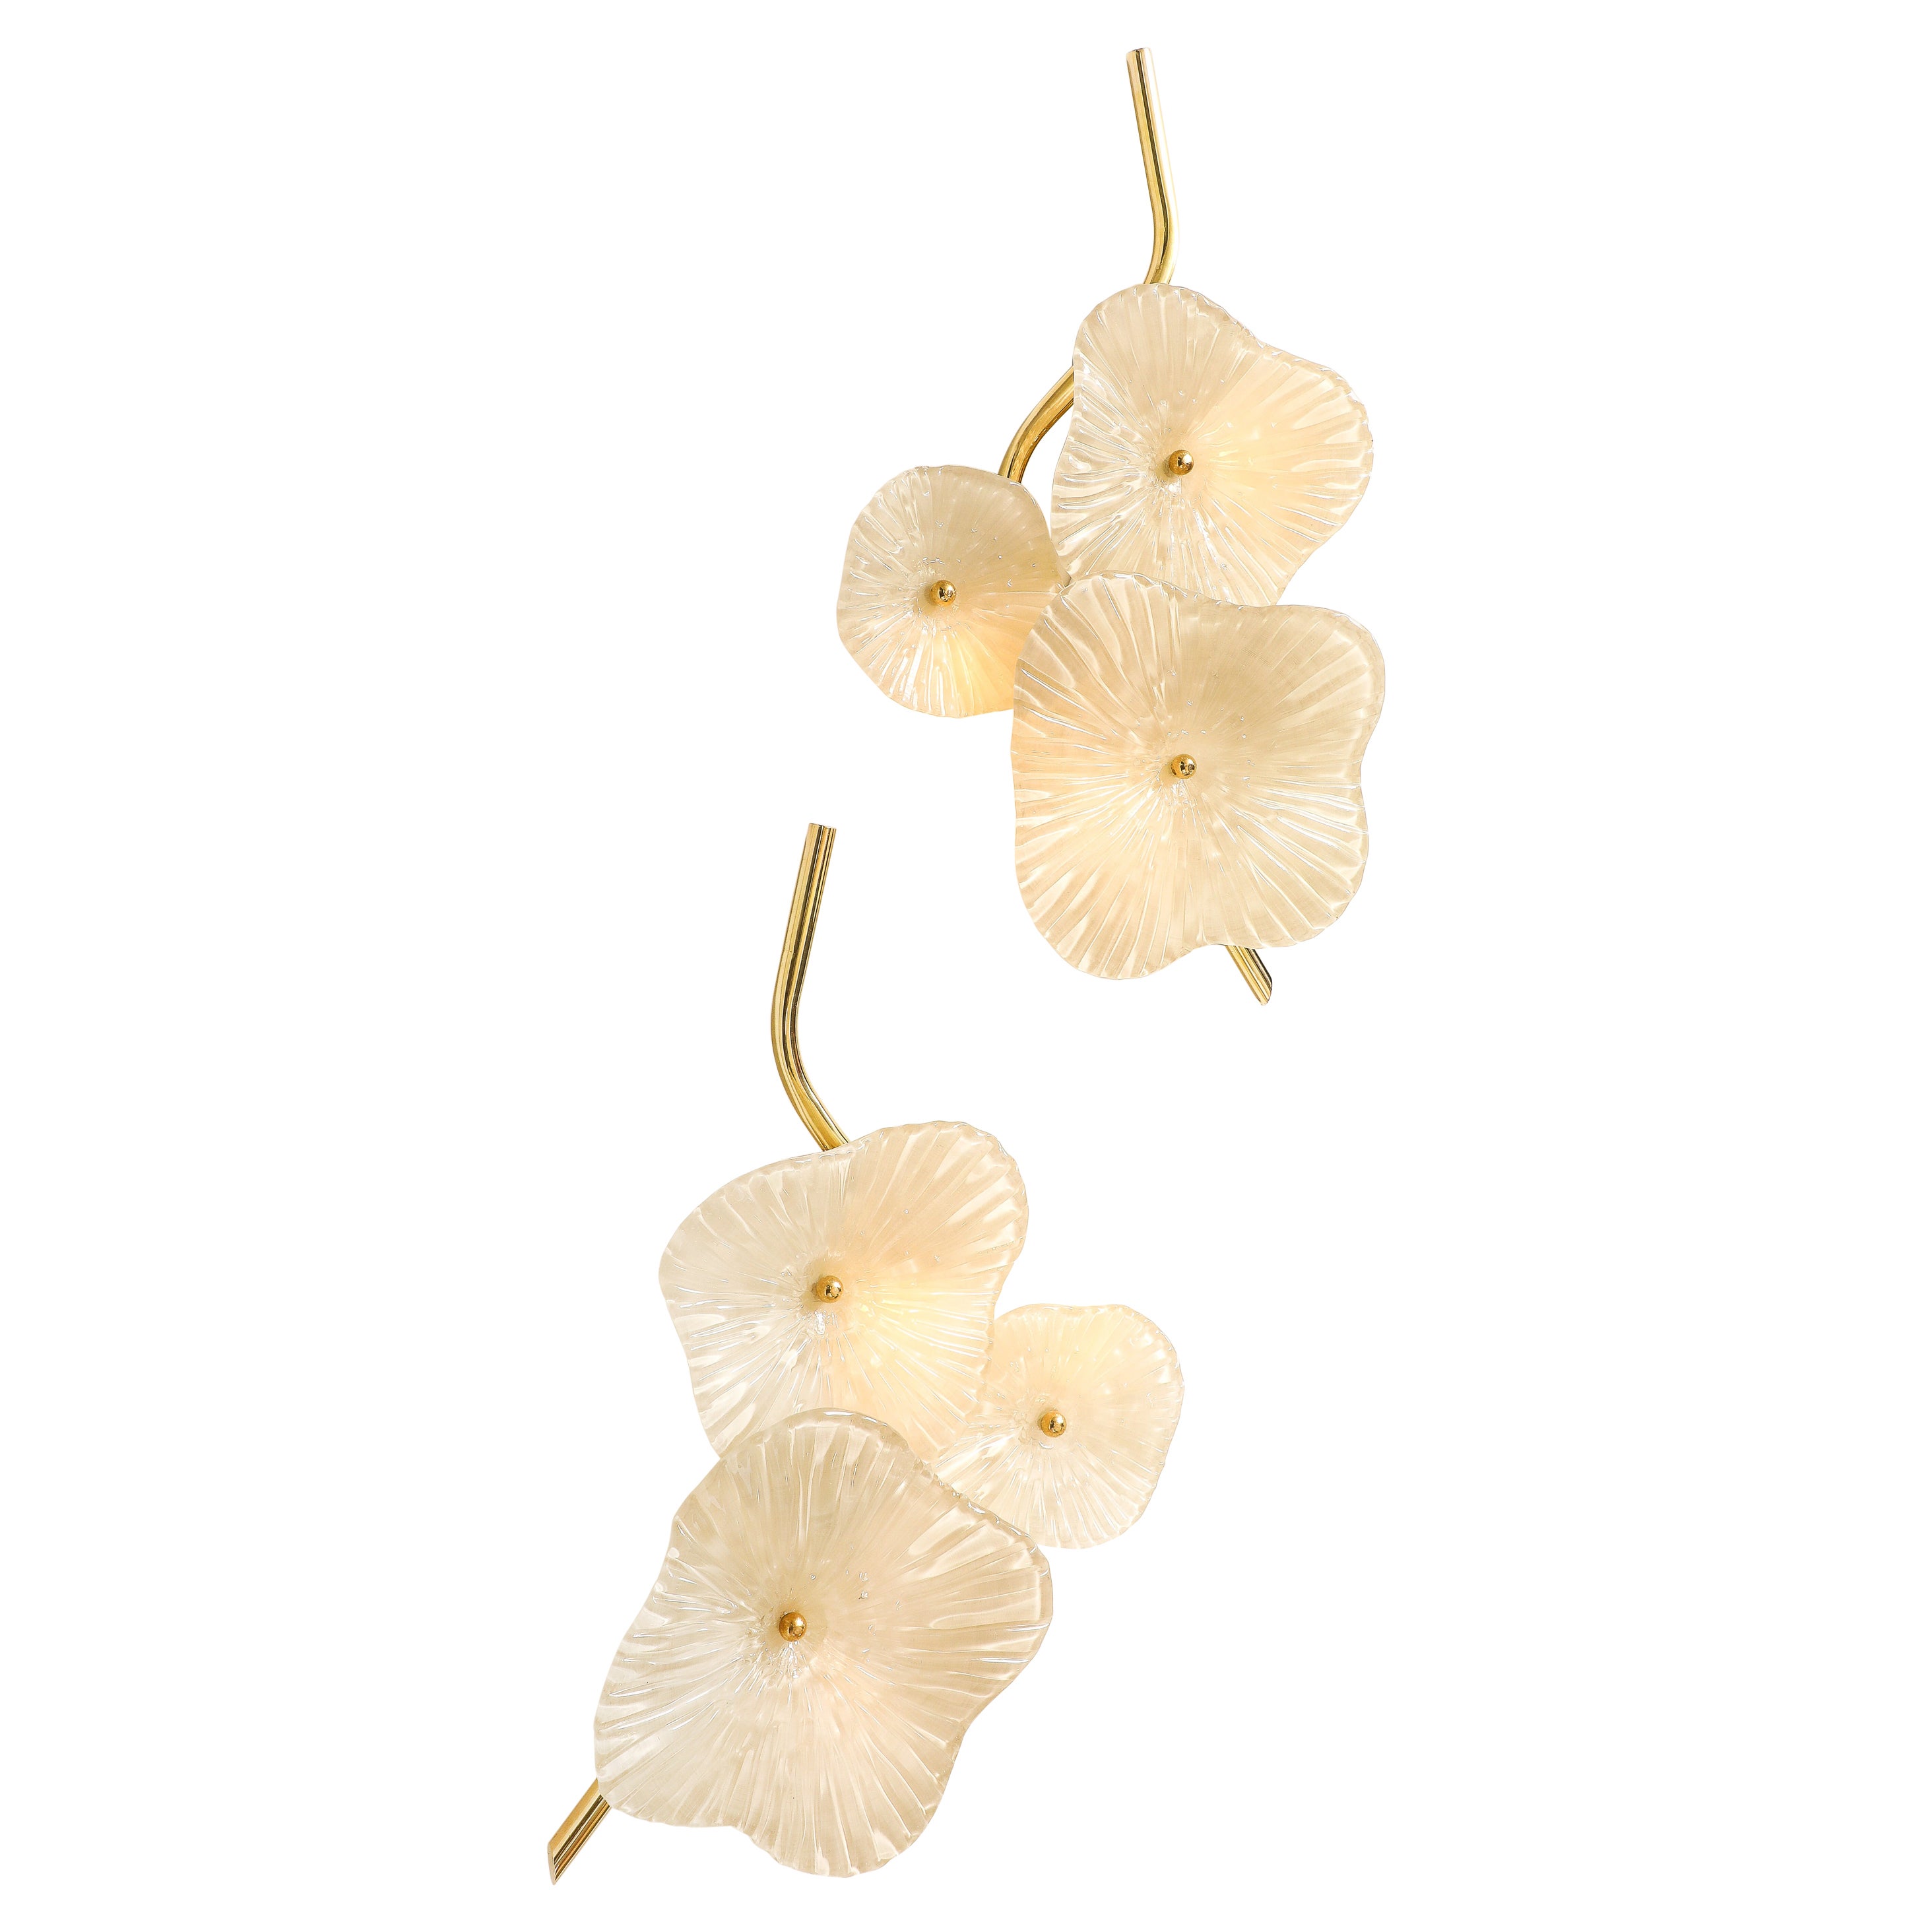  Pair of Ivory Murano "Flower" Glass and Brass Sconces, Italy